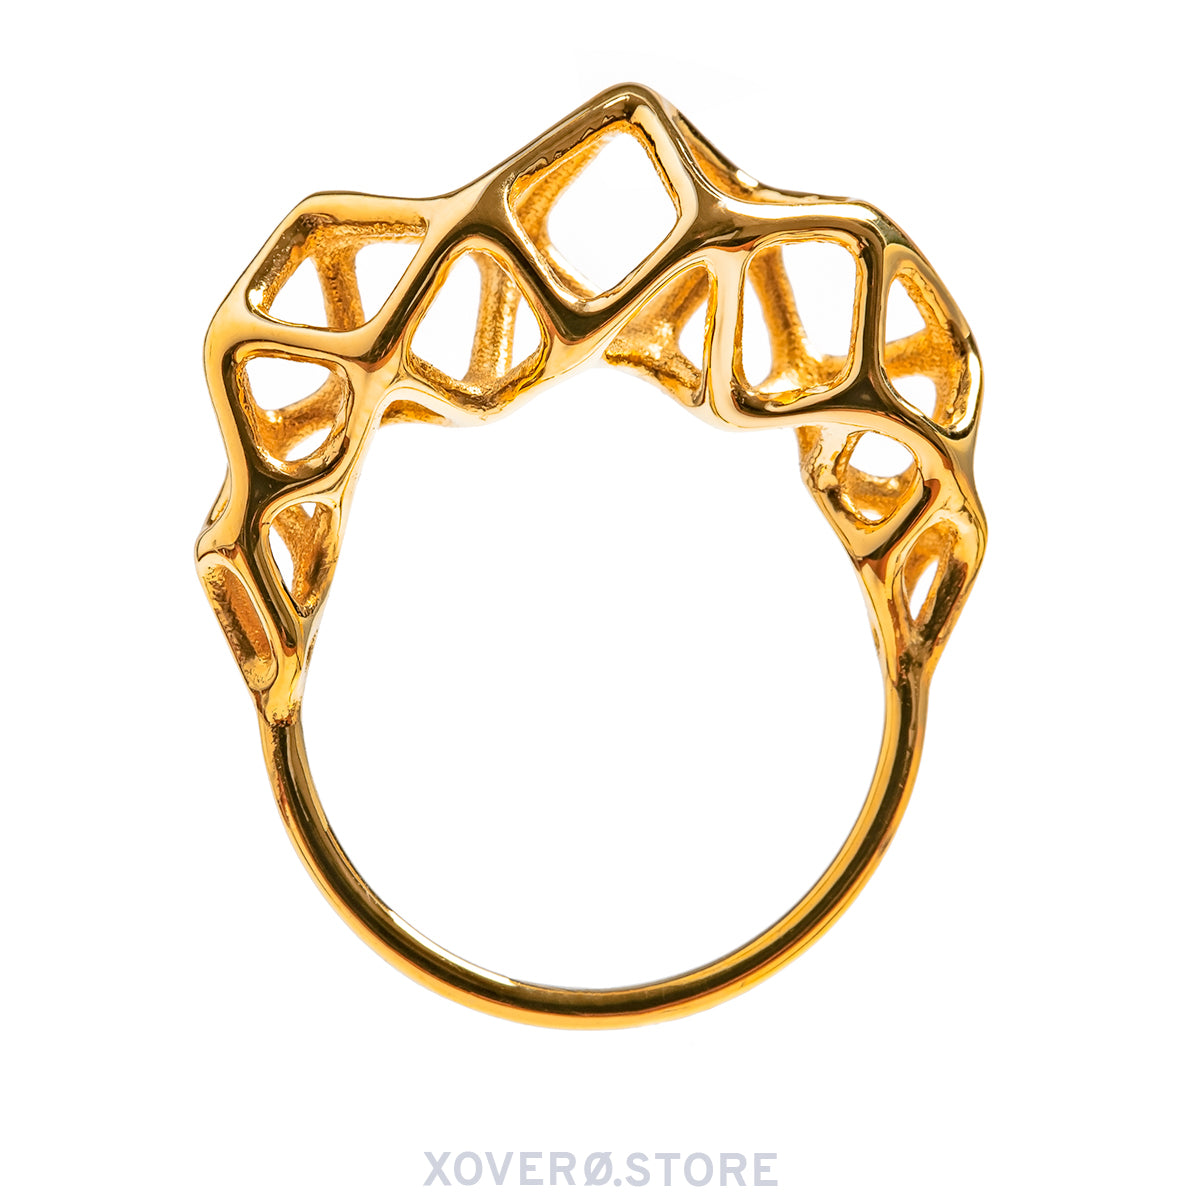 Jewelry Ring 3D Models | 3DJewels - CGI Assets For Jewelry Design